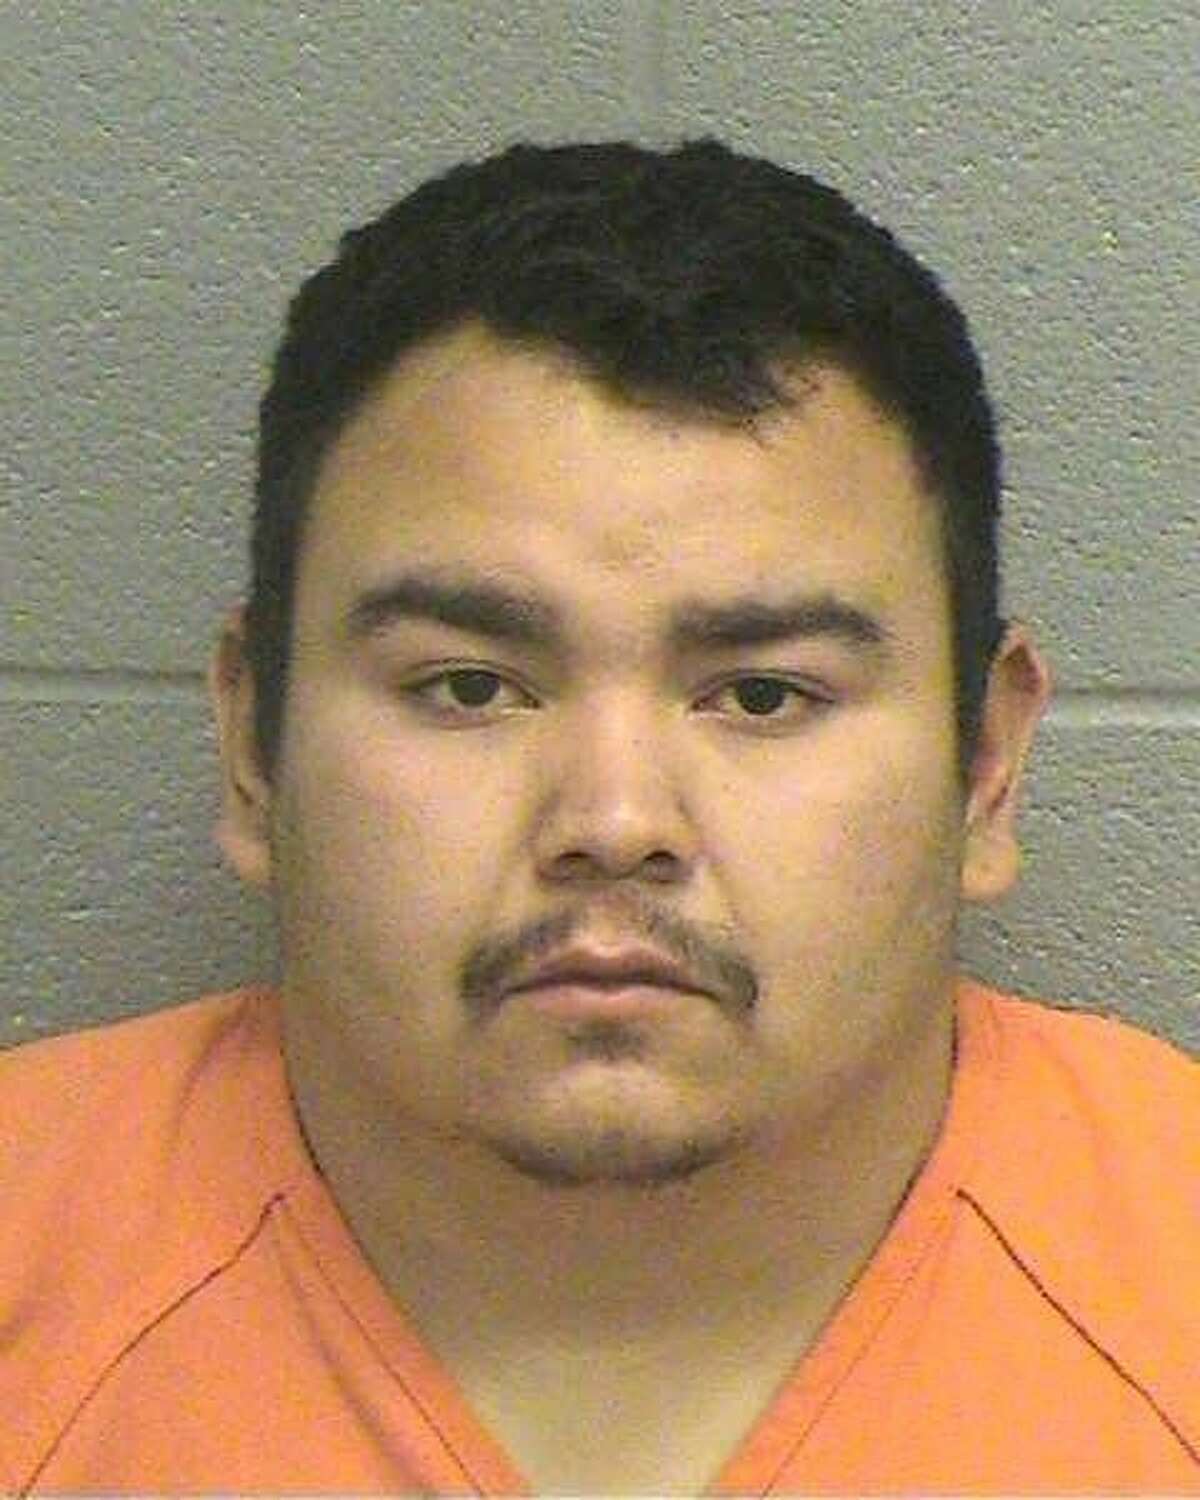 Juan David Chavez-Alvizo, 22, was arrested Nov. 24 for allegedly assaulting a young girl, according to court documents.Chavez-Alvizo was being held Nov. 25 on a $150,000 bond for a first-degree felony charge of aggravated sexual assault of a child.